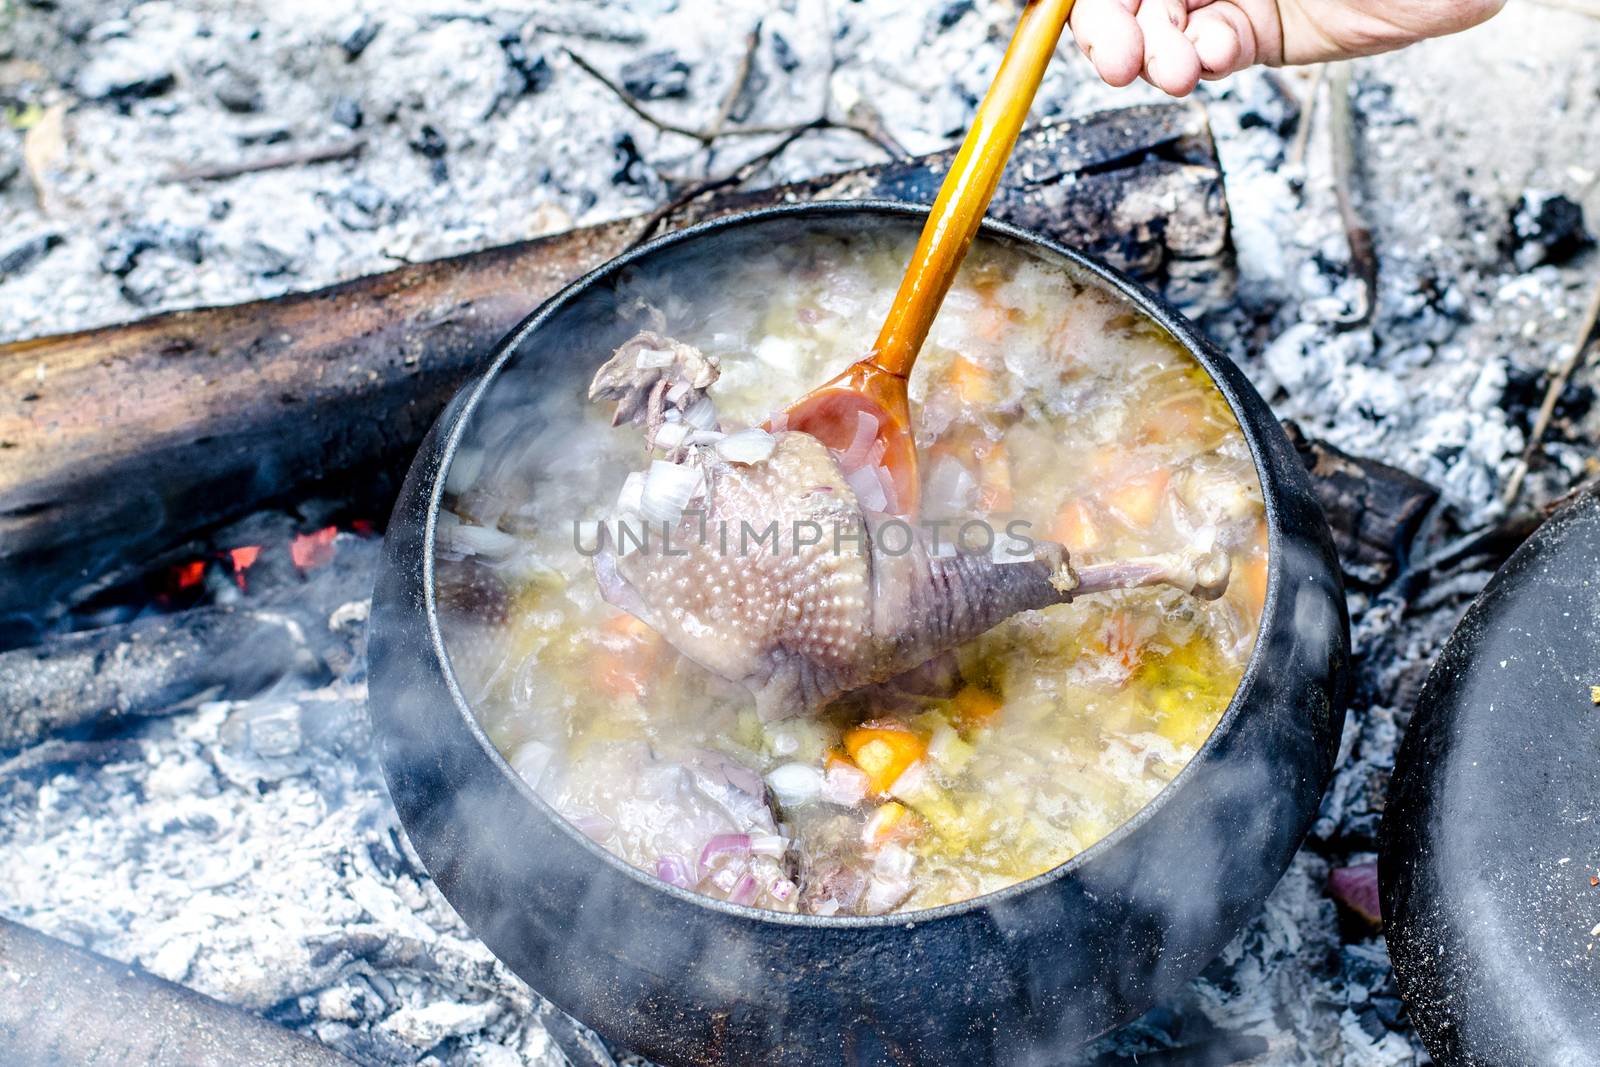 Soup is cooked in a tourist pot on the fire.